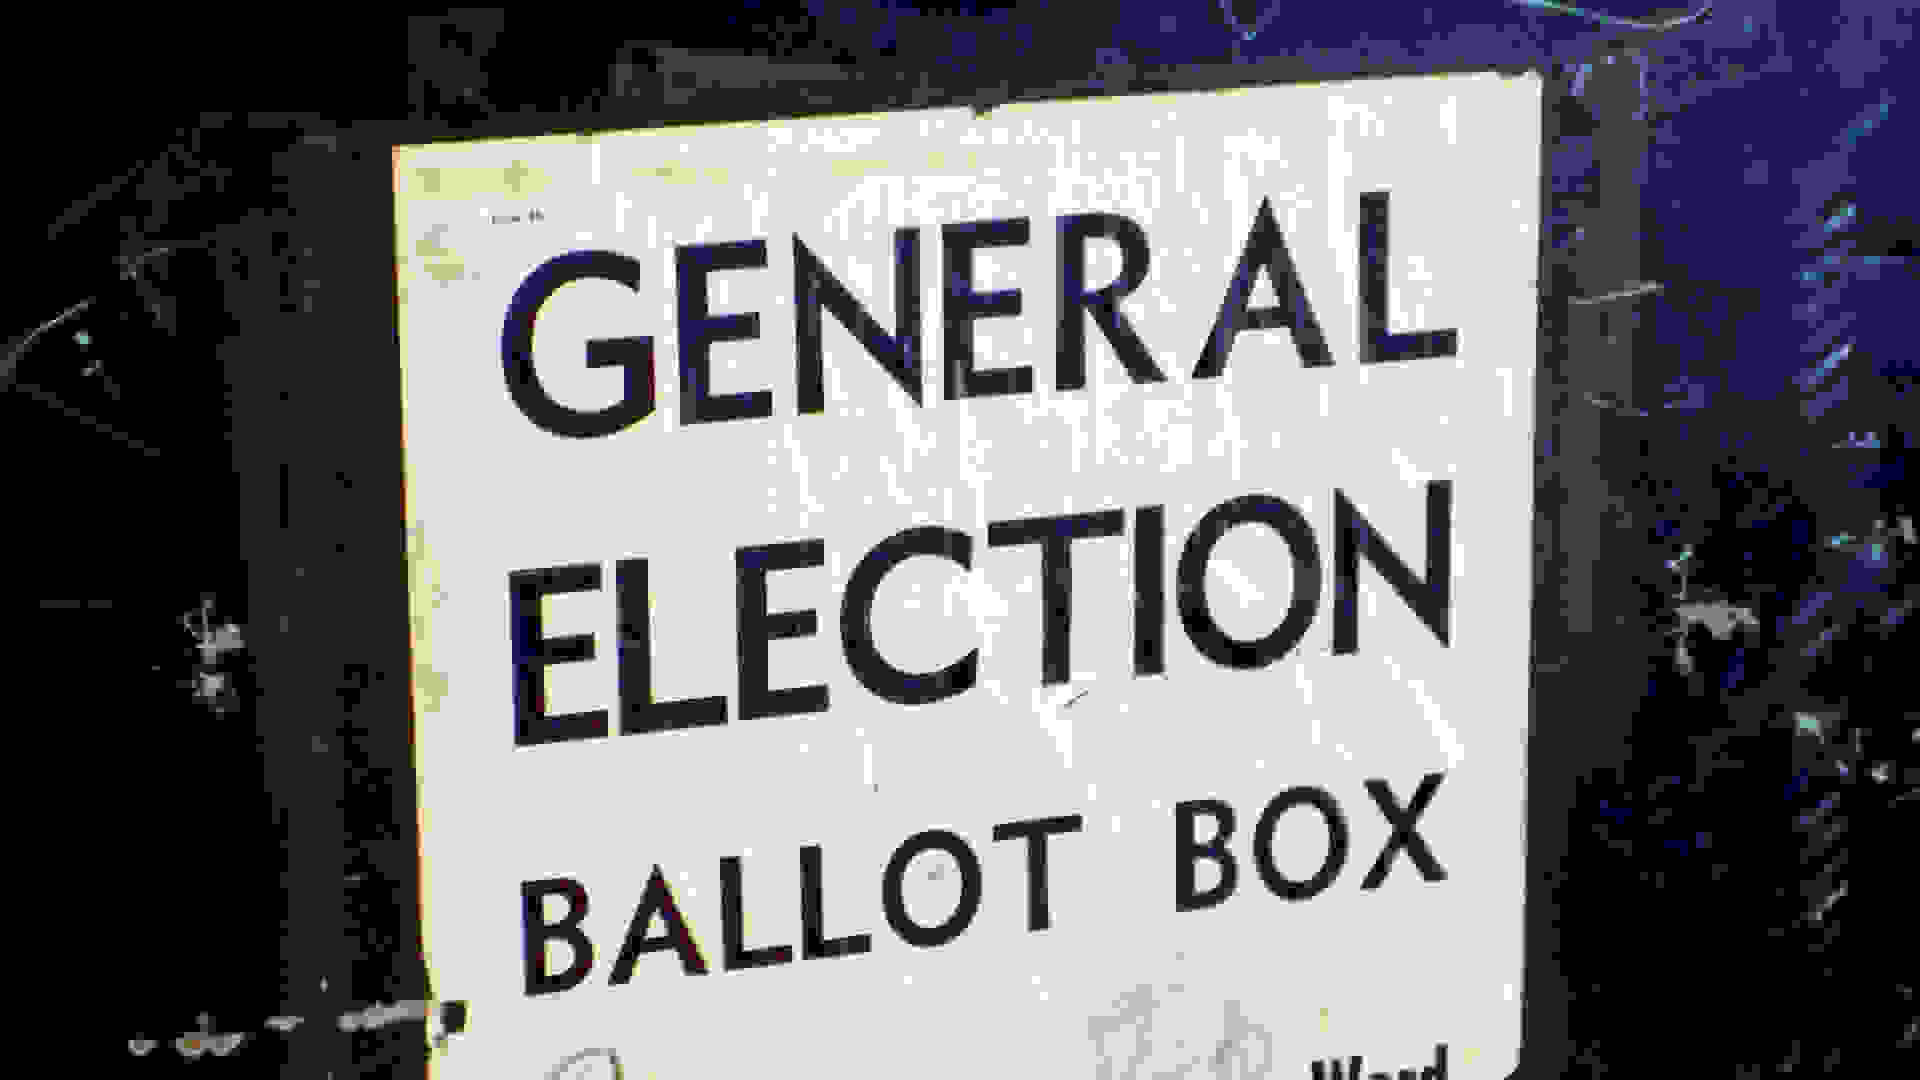 A general election ballot box. Image Courtesy: Northern Ireland Executive, Licensed under the Creative Commons Attribution 2.0 Generic